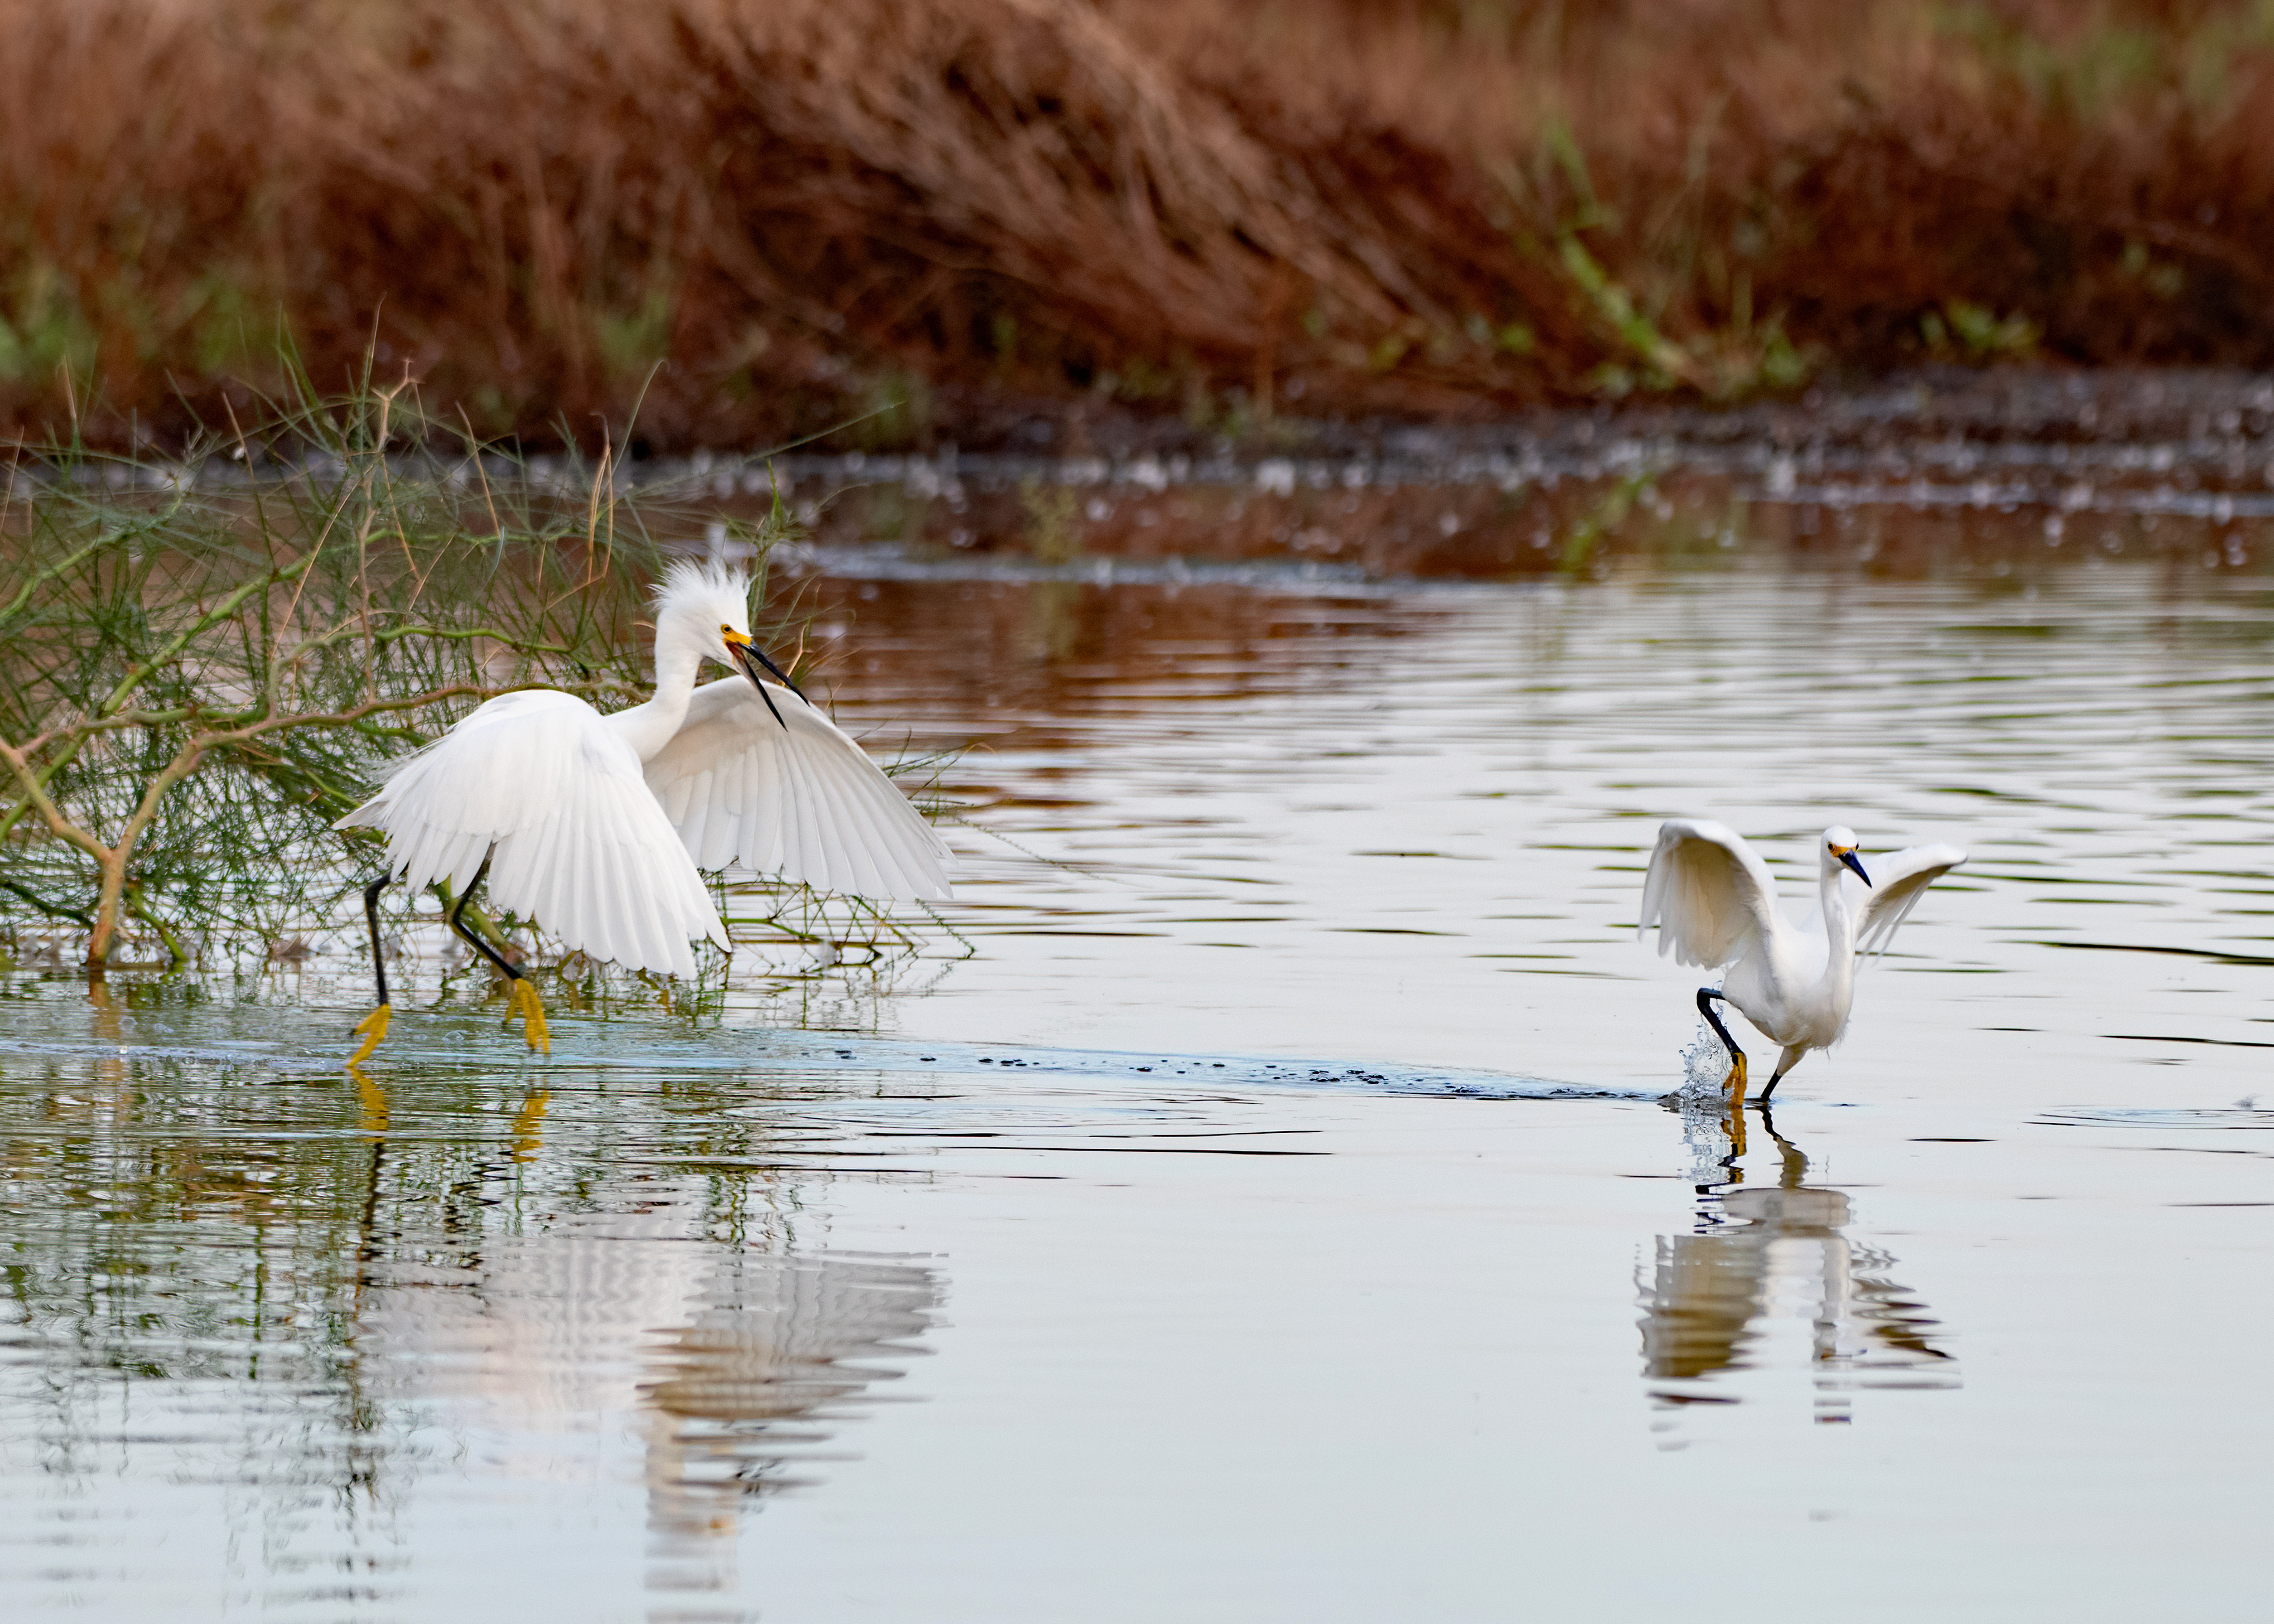 Photo by Patricia Ranweiler  |  Egret chasing a smaller Little Egret - possibly territorial behavior.